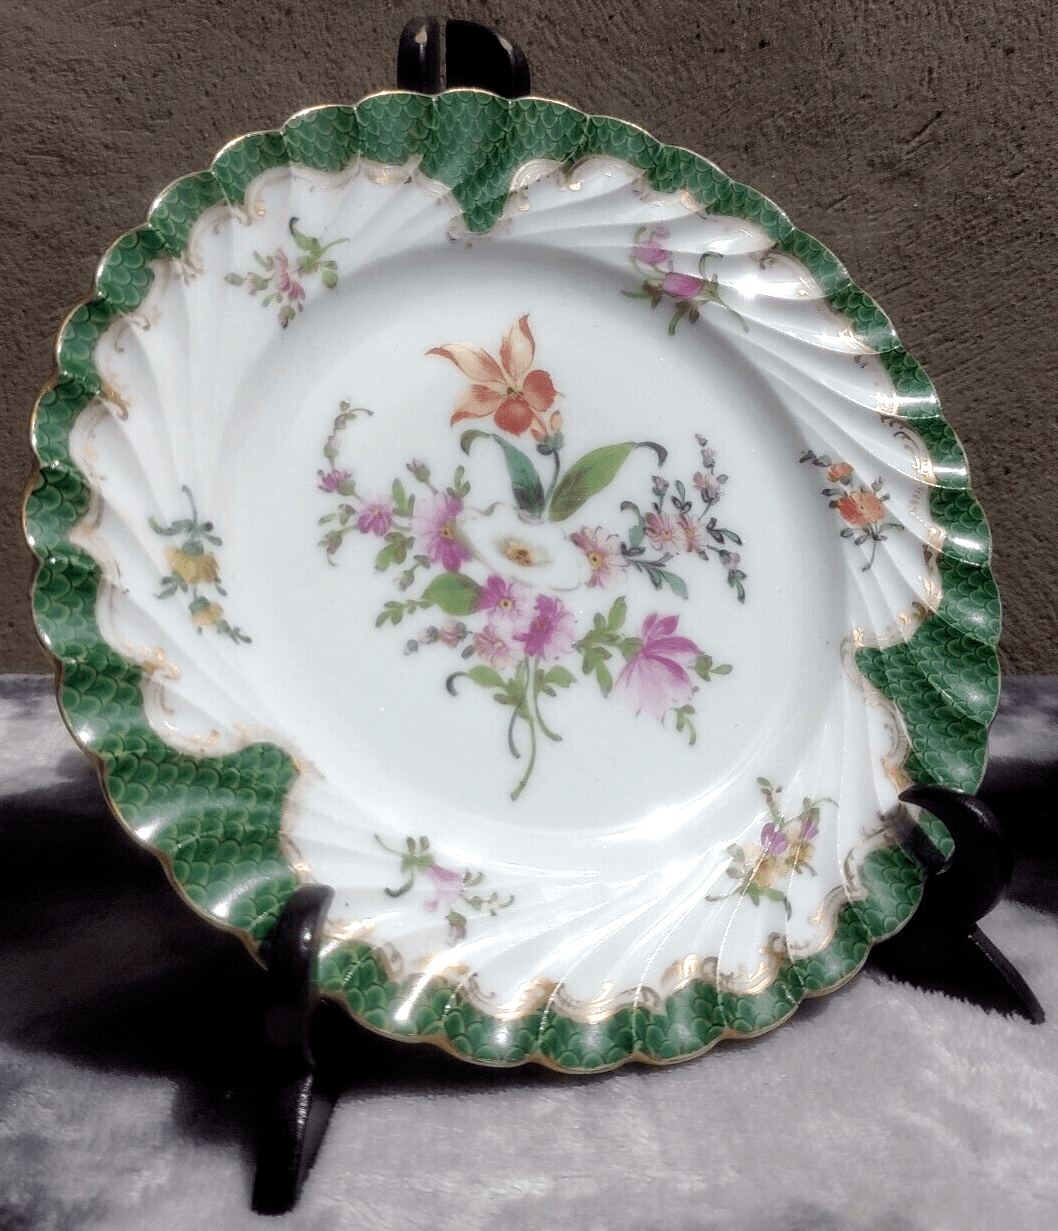 Antique Pair of German Dresden Porcelain Hand painted Floral Side Plates - Tommy's Treasure